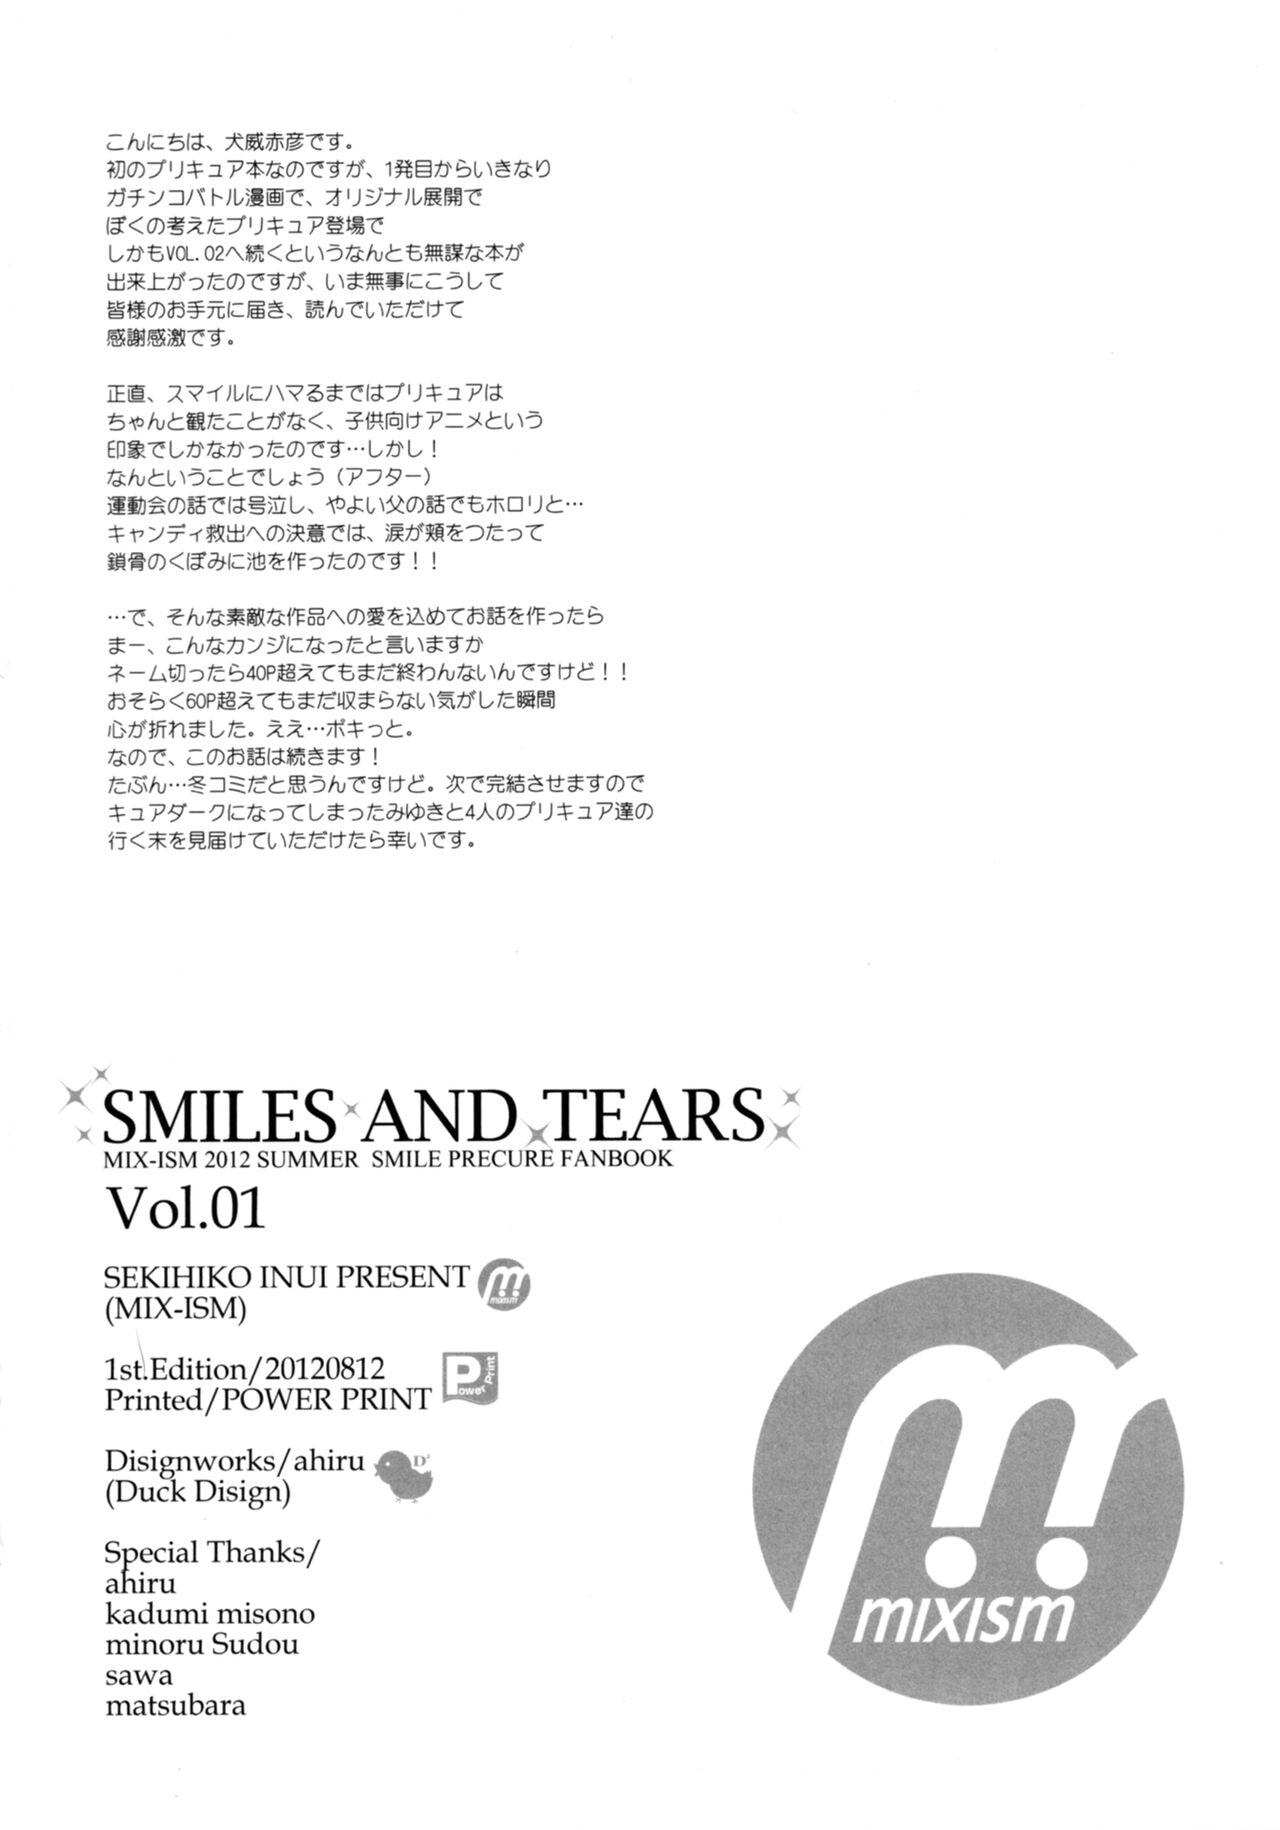 SMILES AND TEARS Vol. 01 32